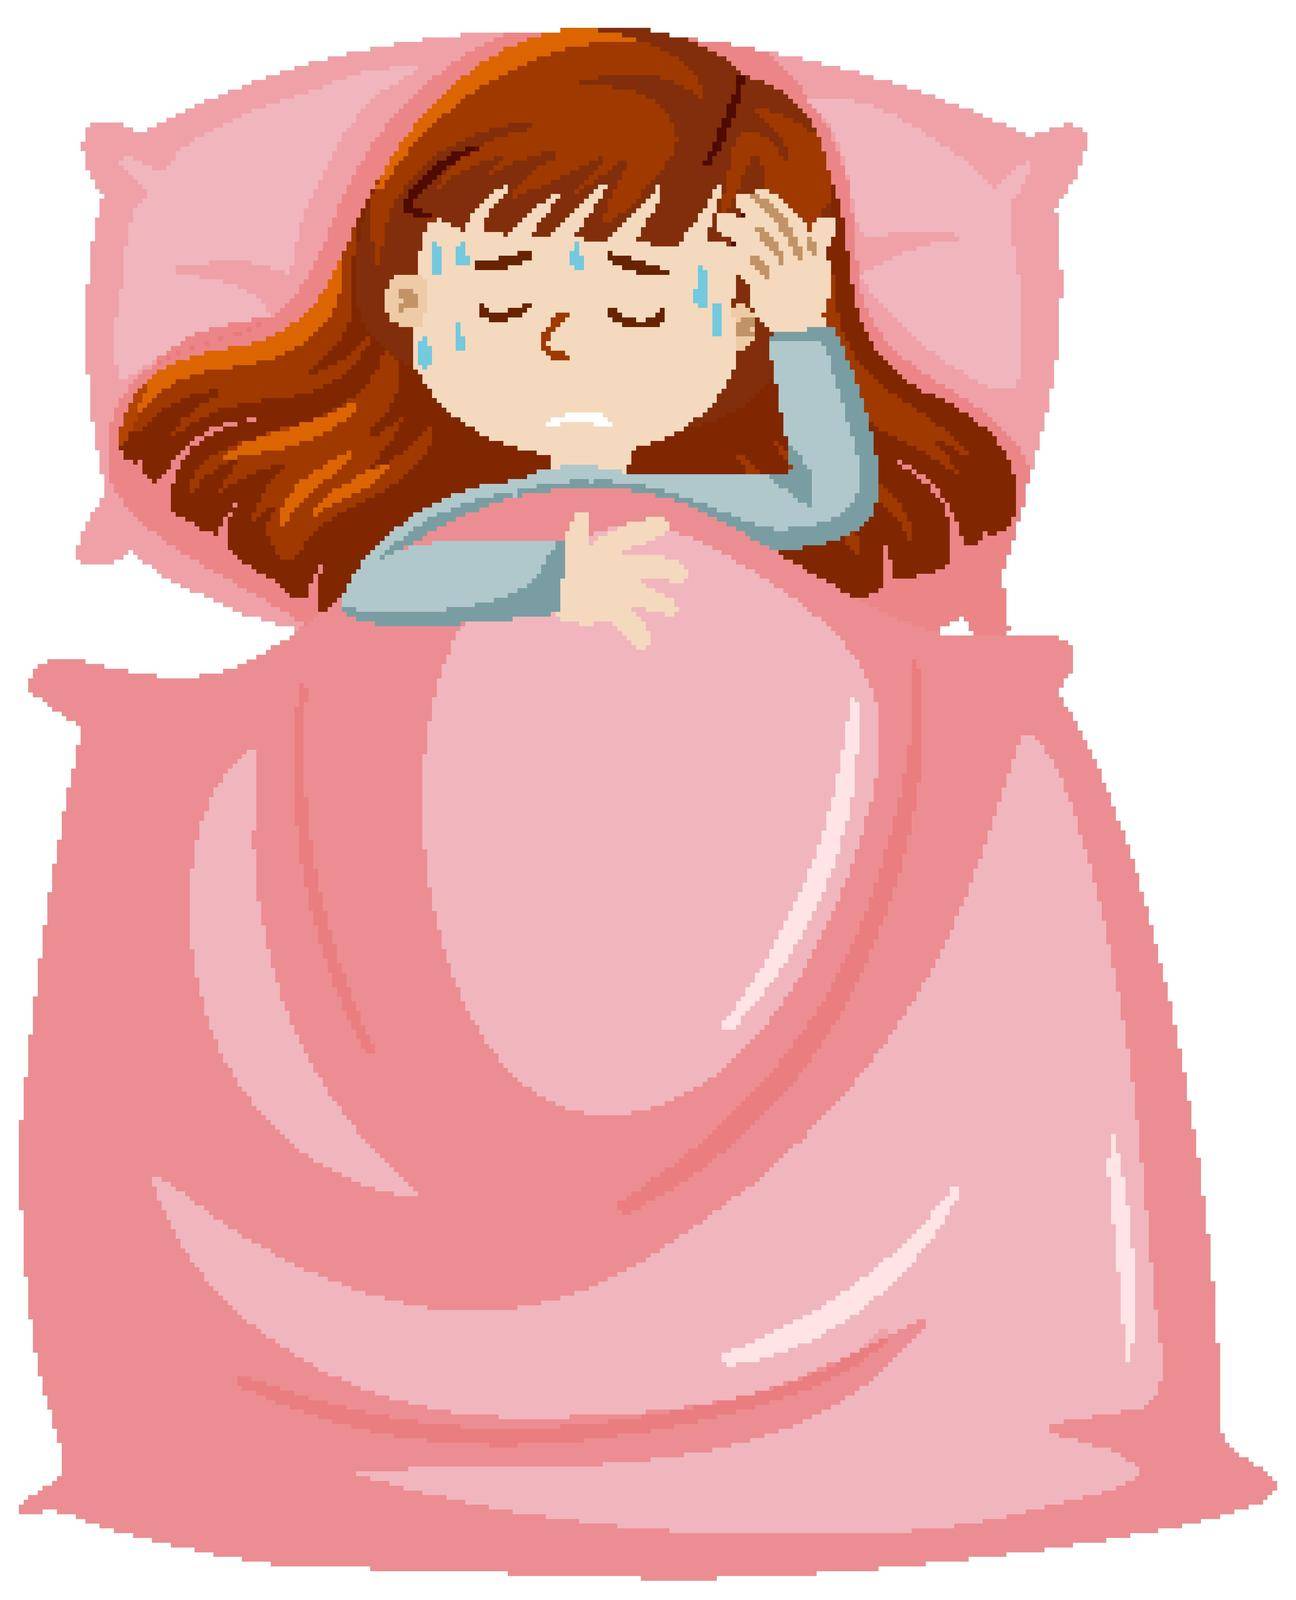 Sick woman resting in bed illustration